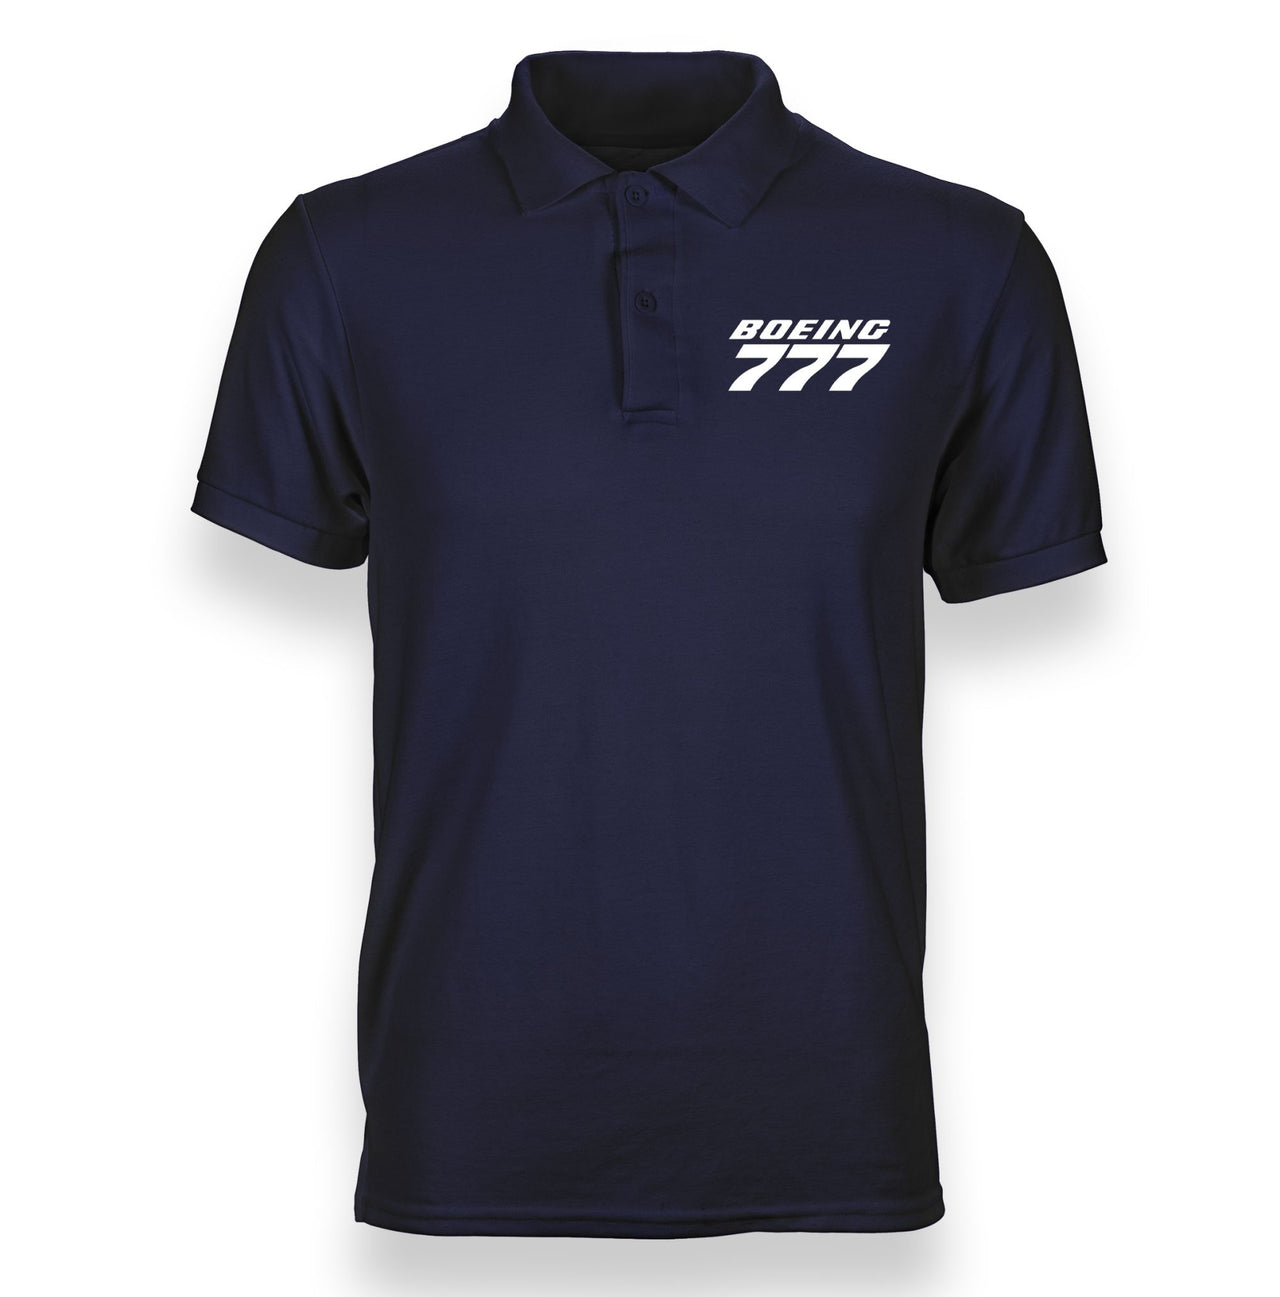 Boeing 777 & Text Designed "WOMEN" Polo T-Shirts